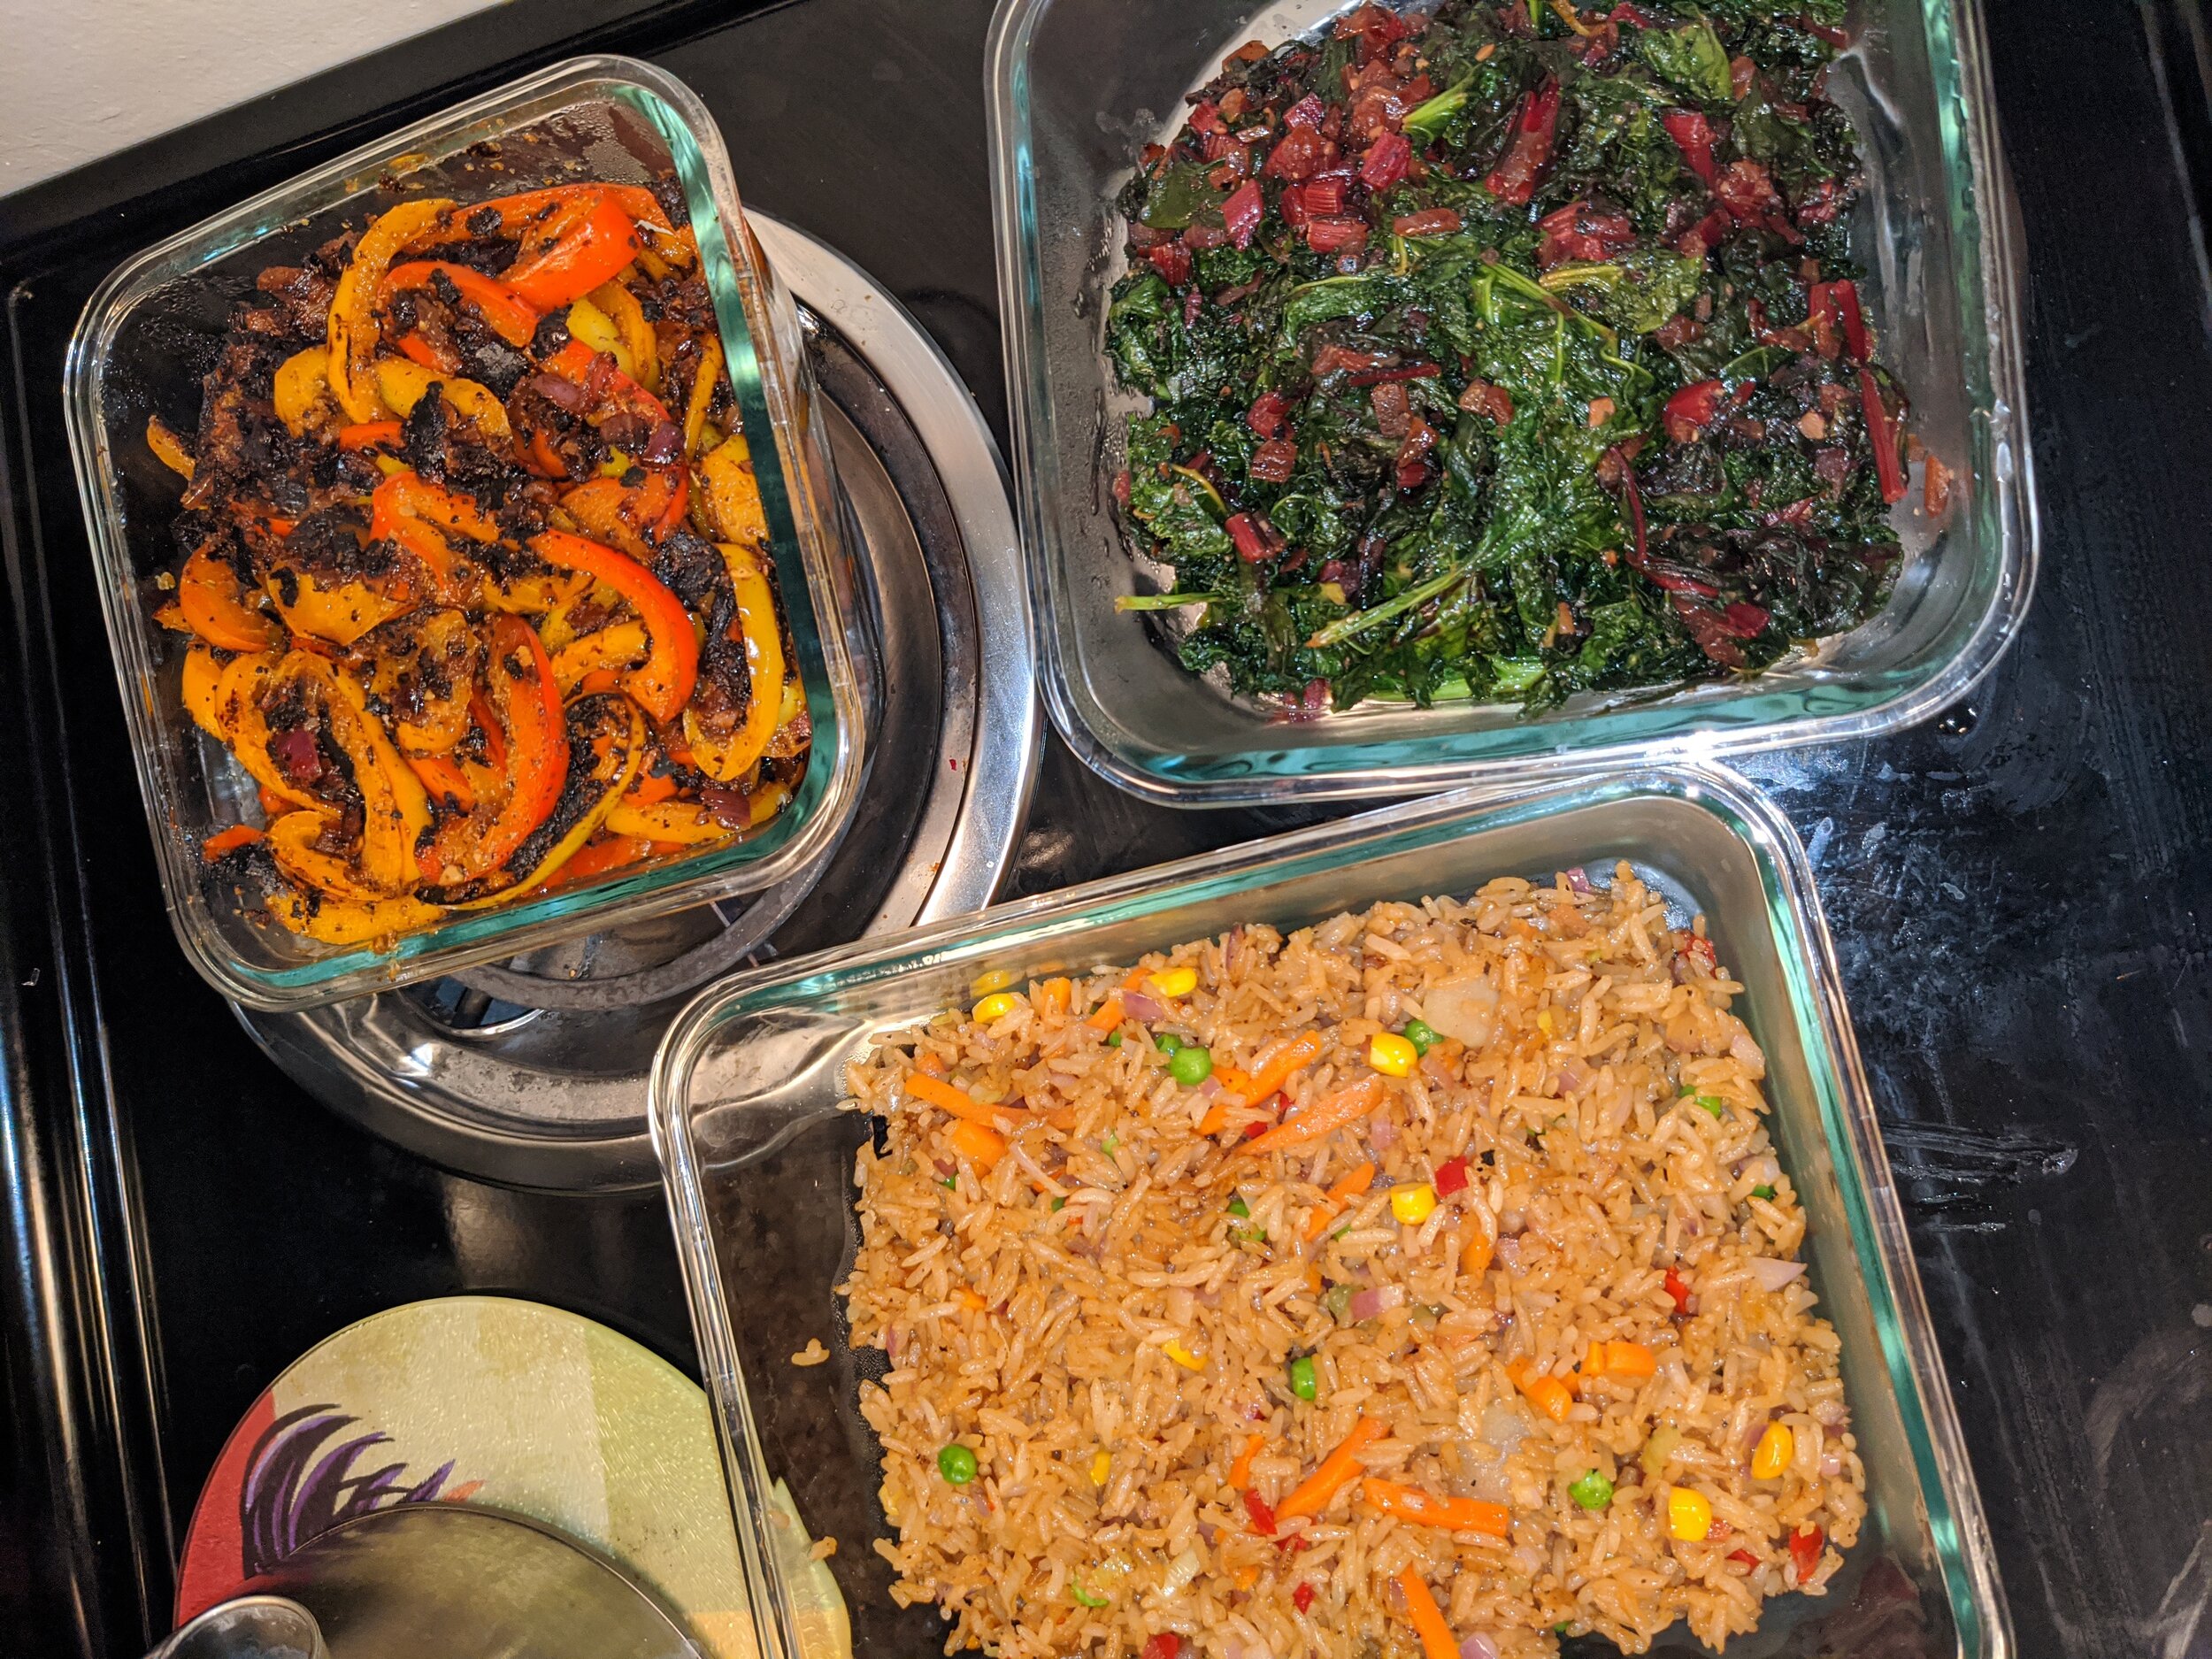 chard, peppers, rice cooked.jpg